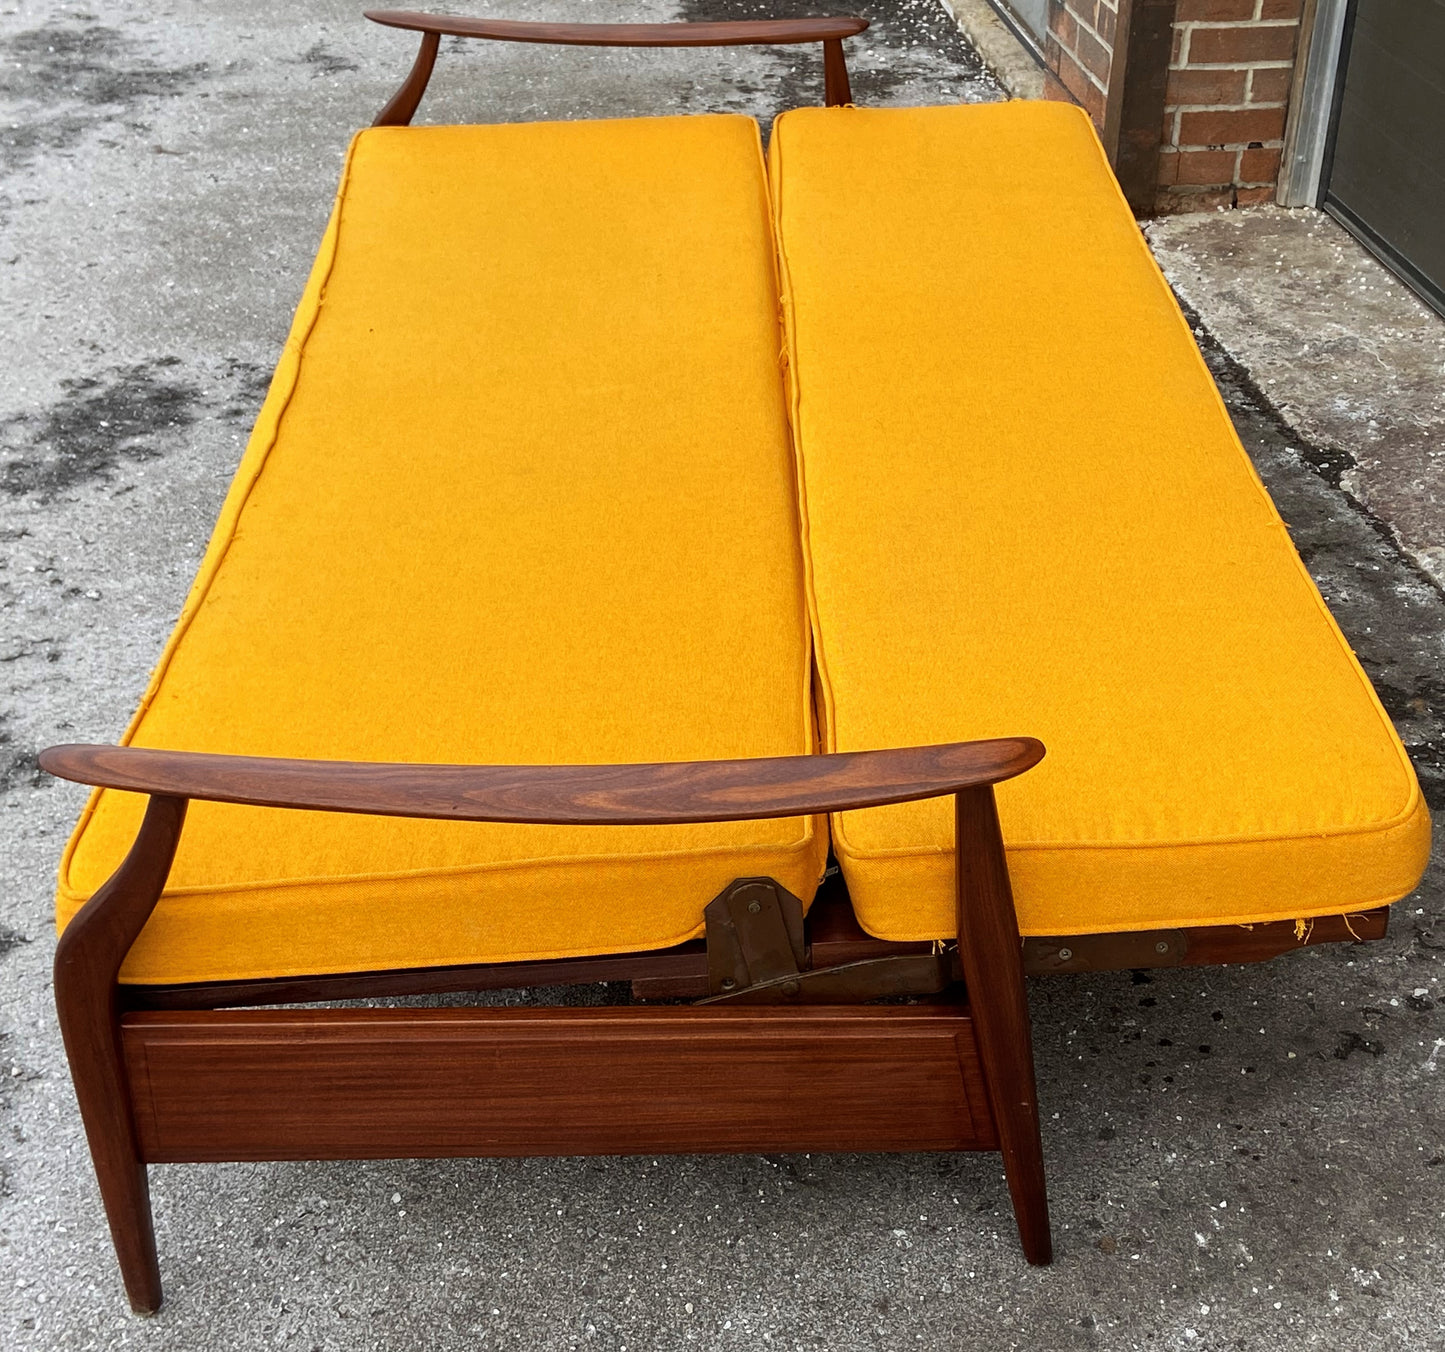 REFINISHED Mid Century Modern Solid Teak Sofa - Bed with NEW CUSHIONS